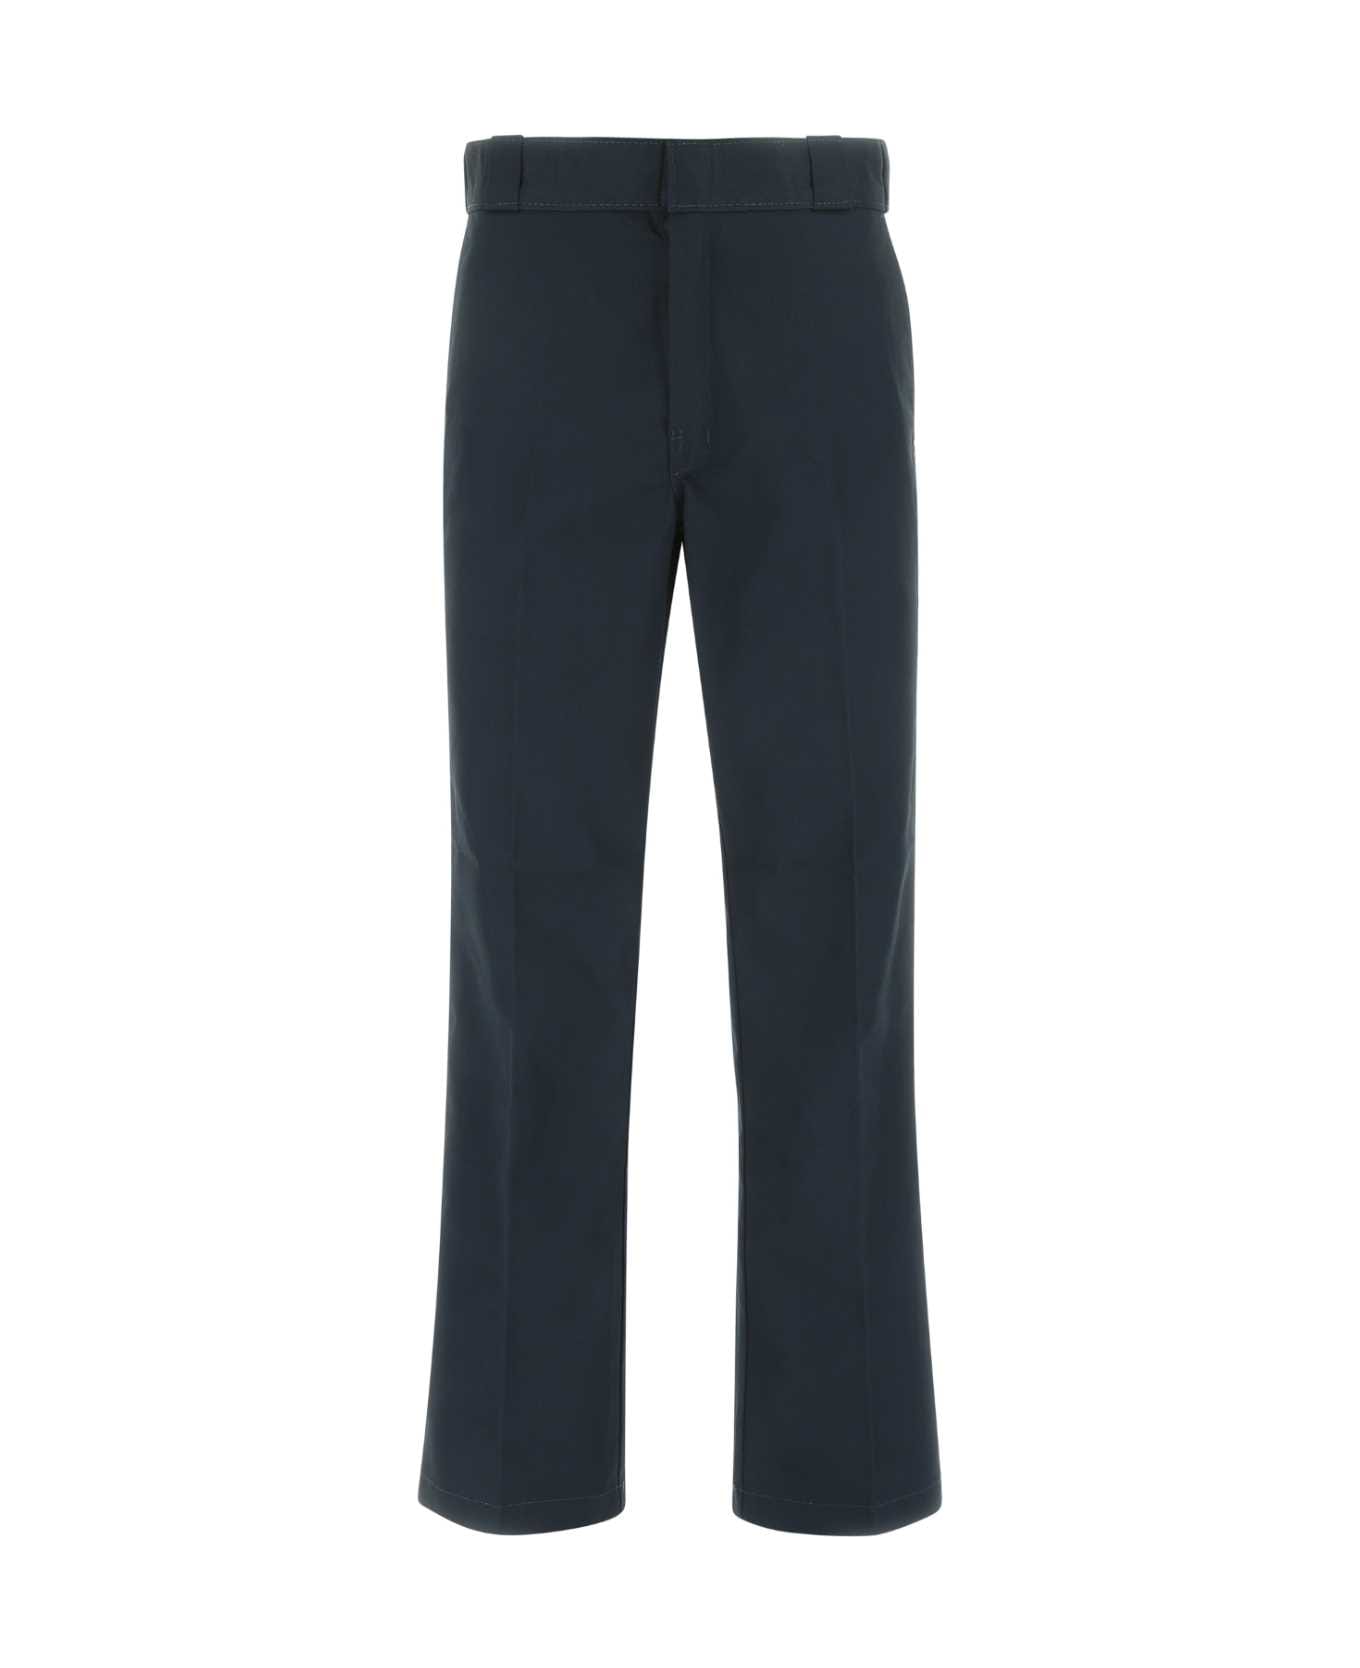 Dickies Midnight Blue Polyester Blend Pant - DNX1